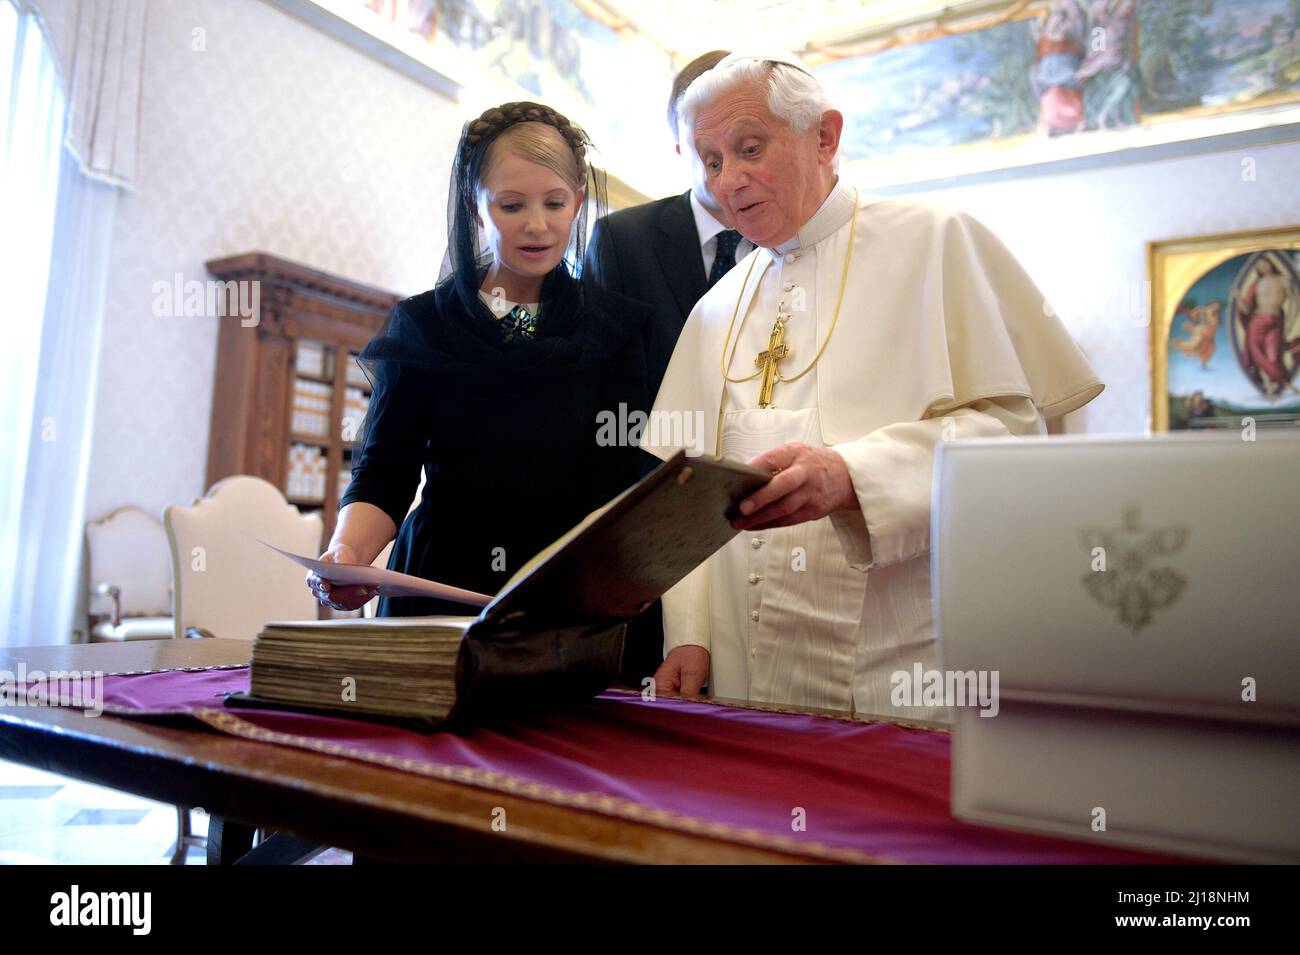 Vatican City State, Vatikanstadt. 23rd Mar, 2022. Yulia Tymoshenko was the first female Prime Minister of Ukraine serving two terms in office (2005, and 2007 to 2010). Credit: Pope Benedict XVI and Ukrainian Prime Minister Yulia Tymoshenko exchange gifts during a private audience on October 16, 2009 at The Vatican/dpa/Alamy Live News Stock Photo